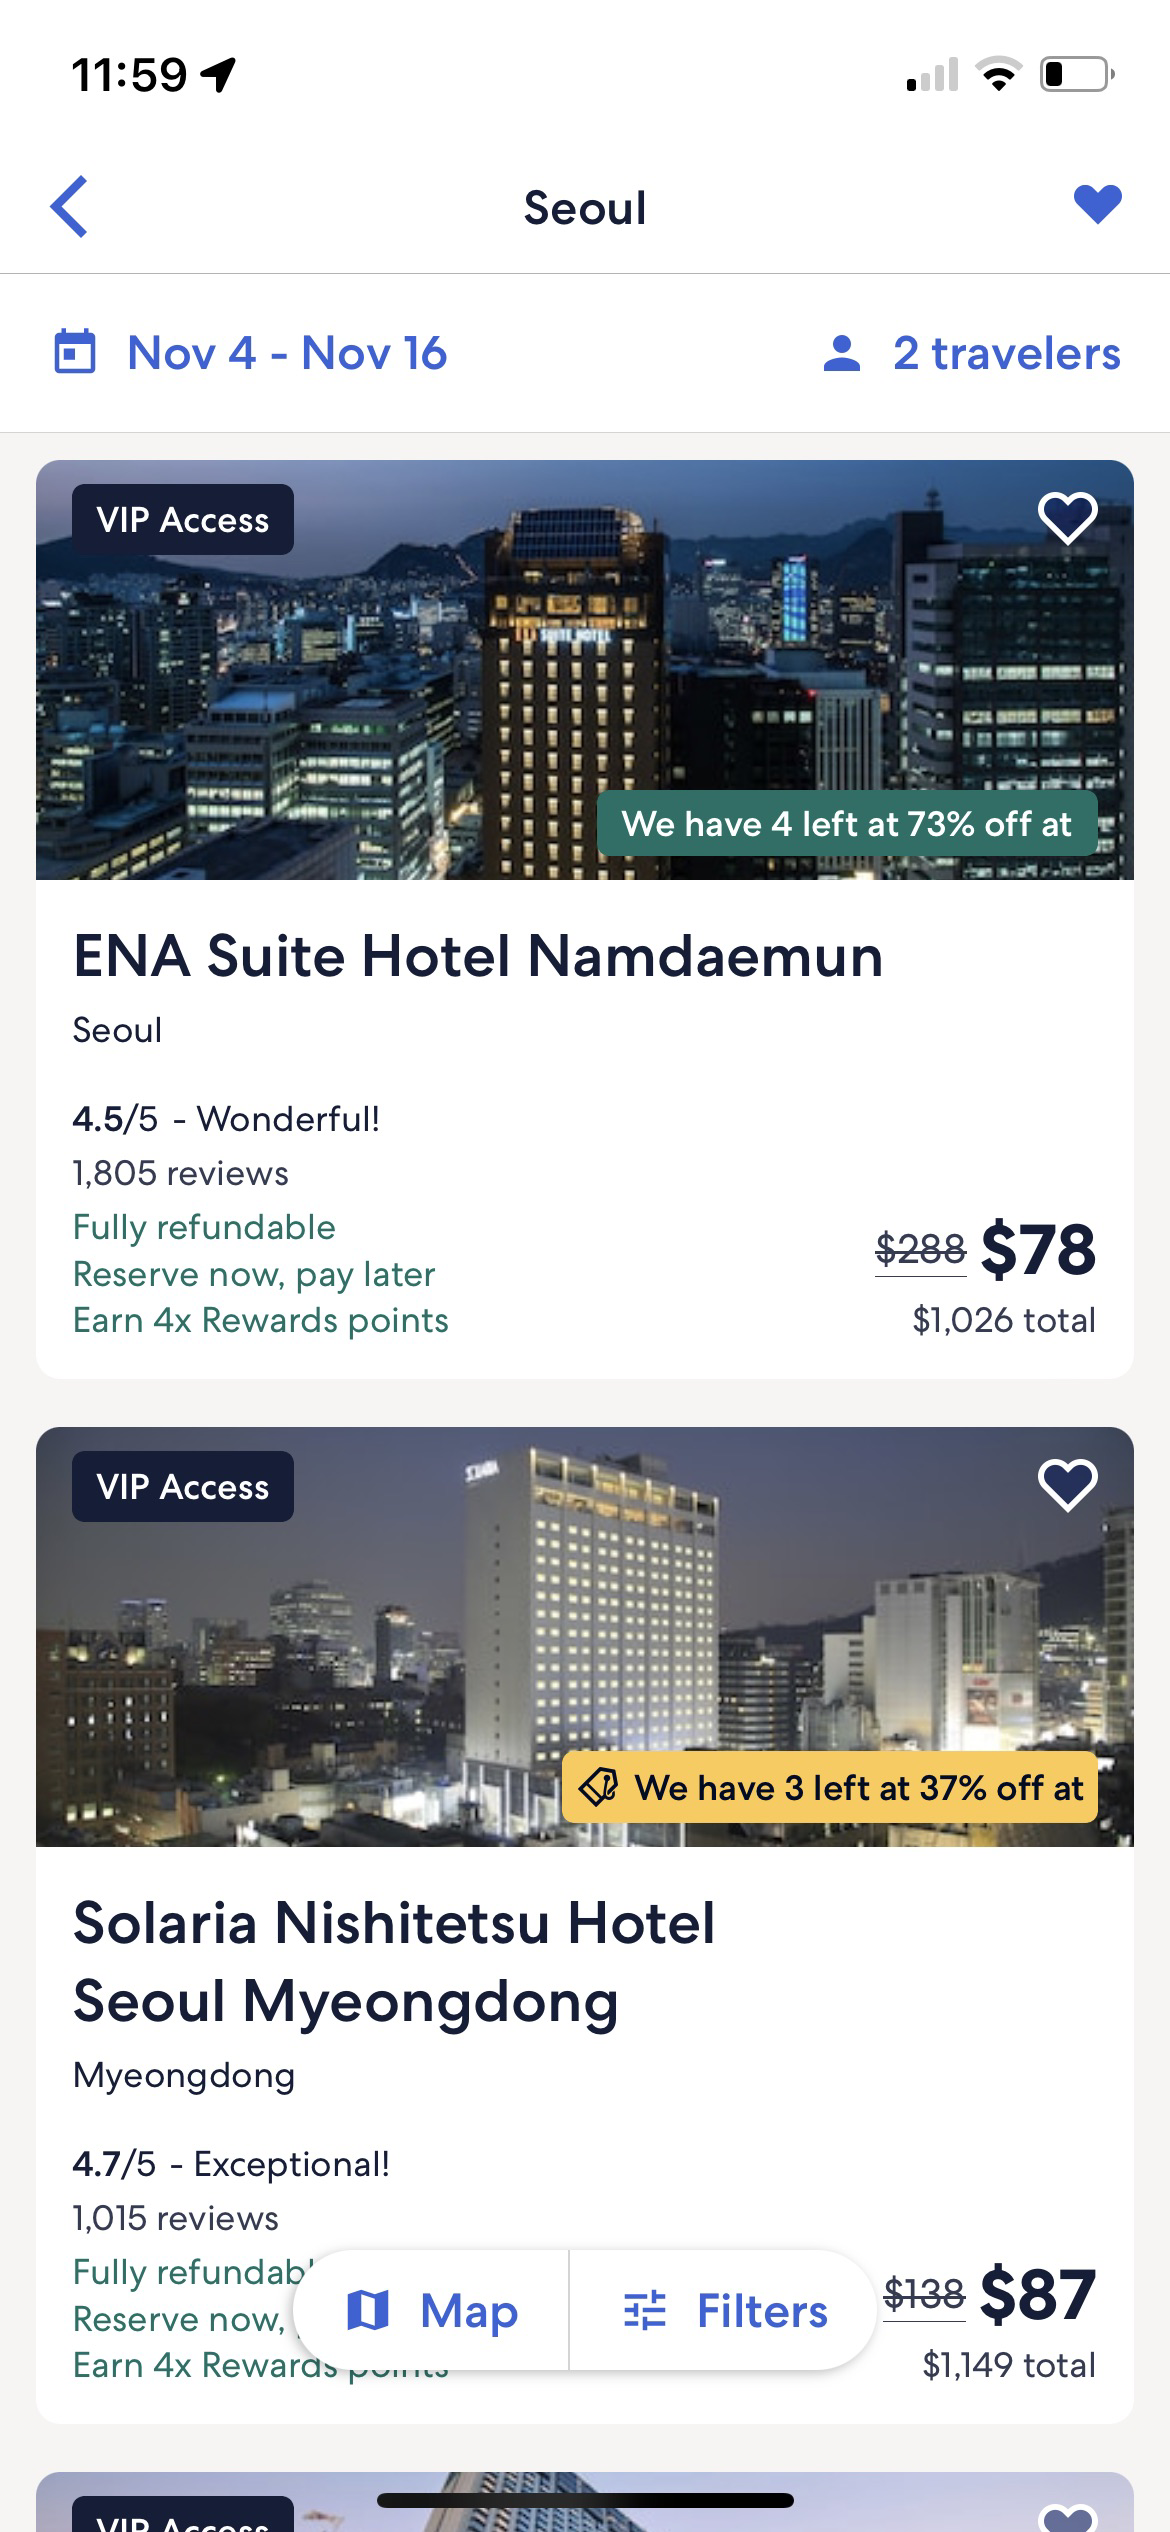 Expedia hotel search results in light mode